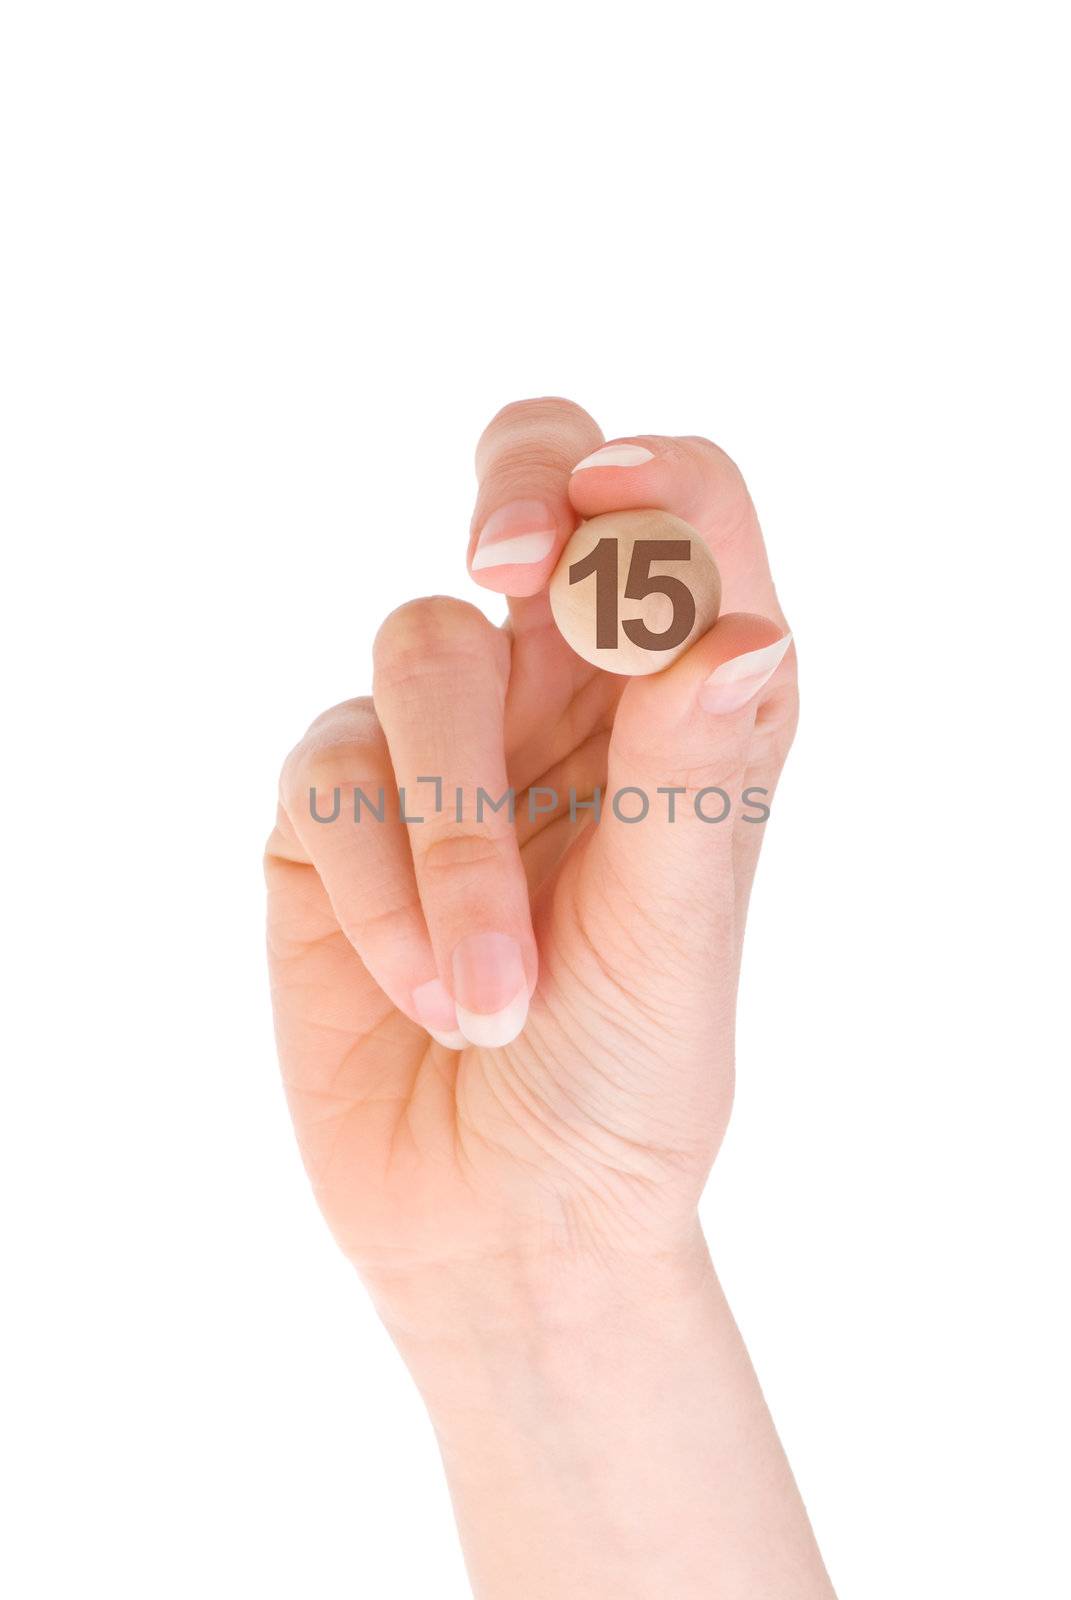 Fifteenth bingo ball in the hand on white background